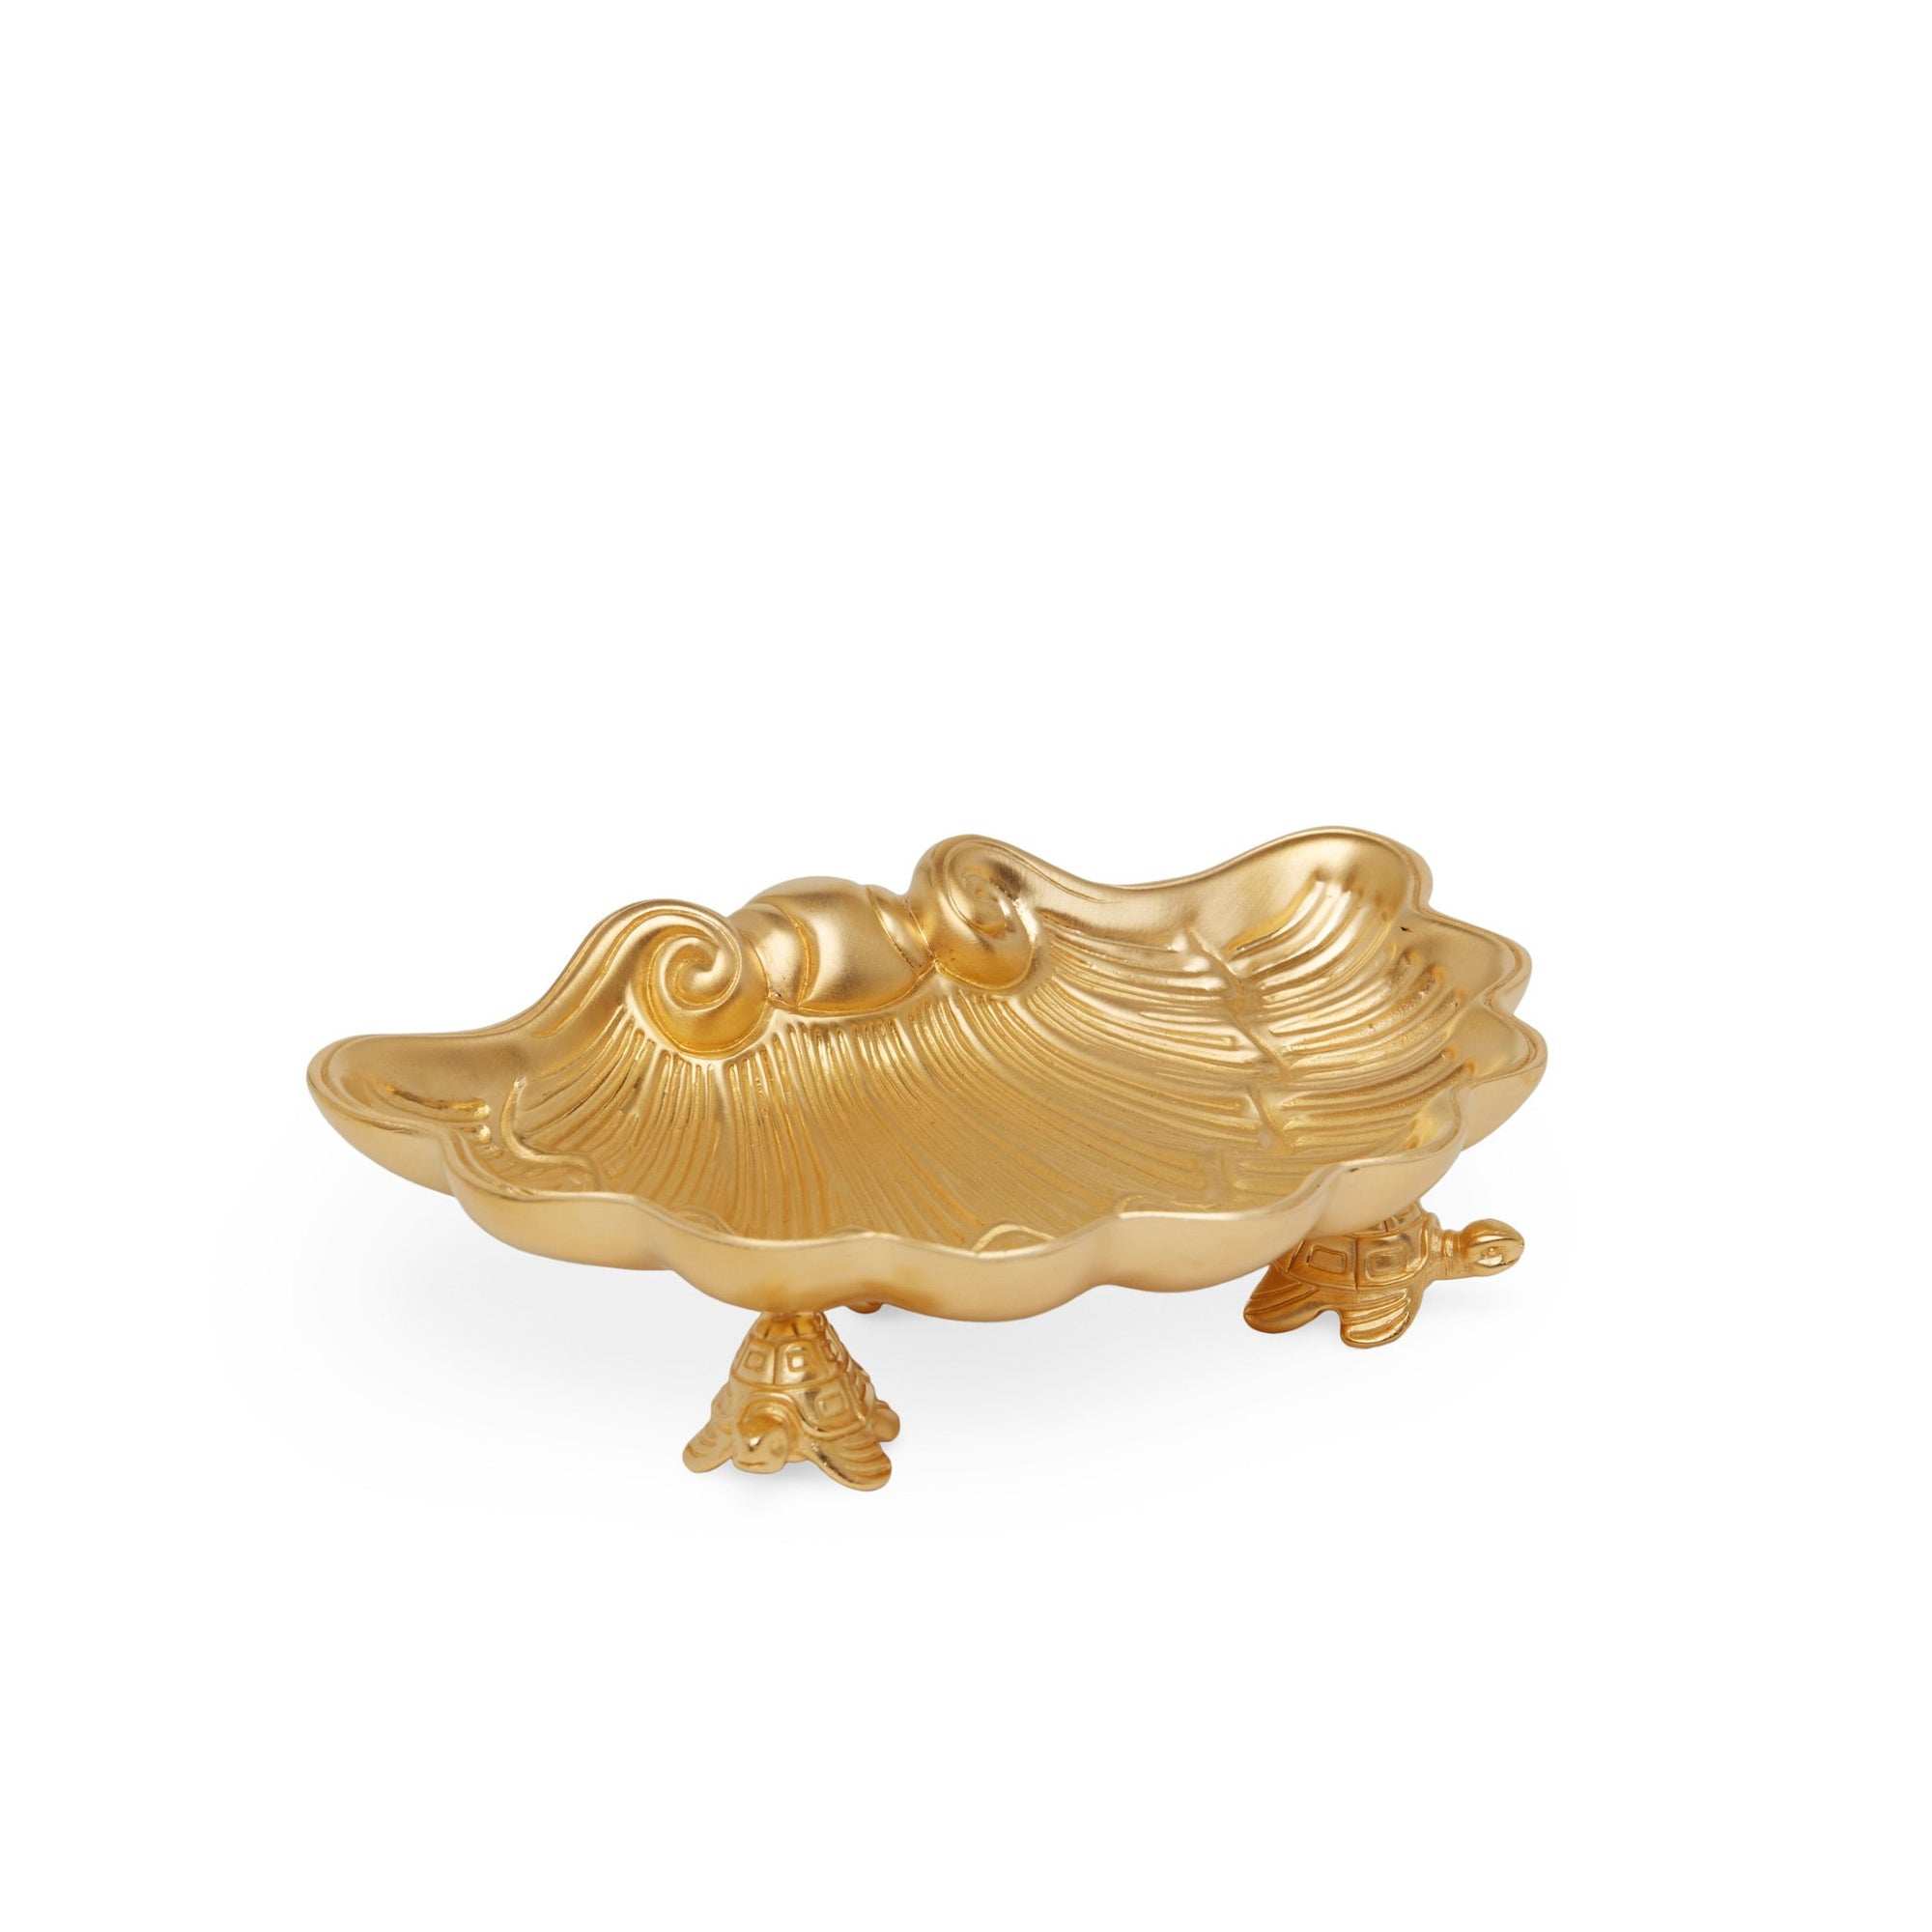 3326-GP Sherle Wagner International Shell with Turtle Feet Soap Dish in Gold Plate